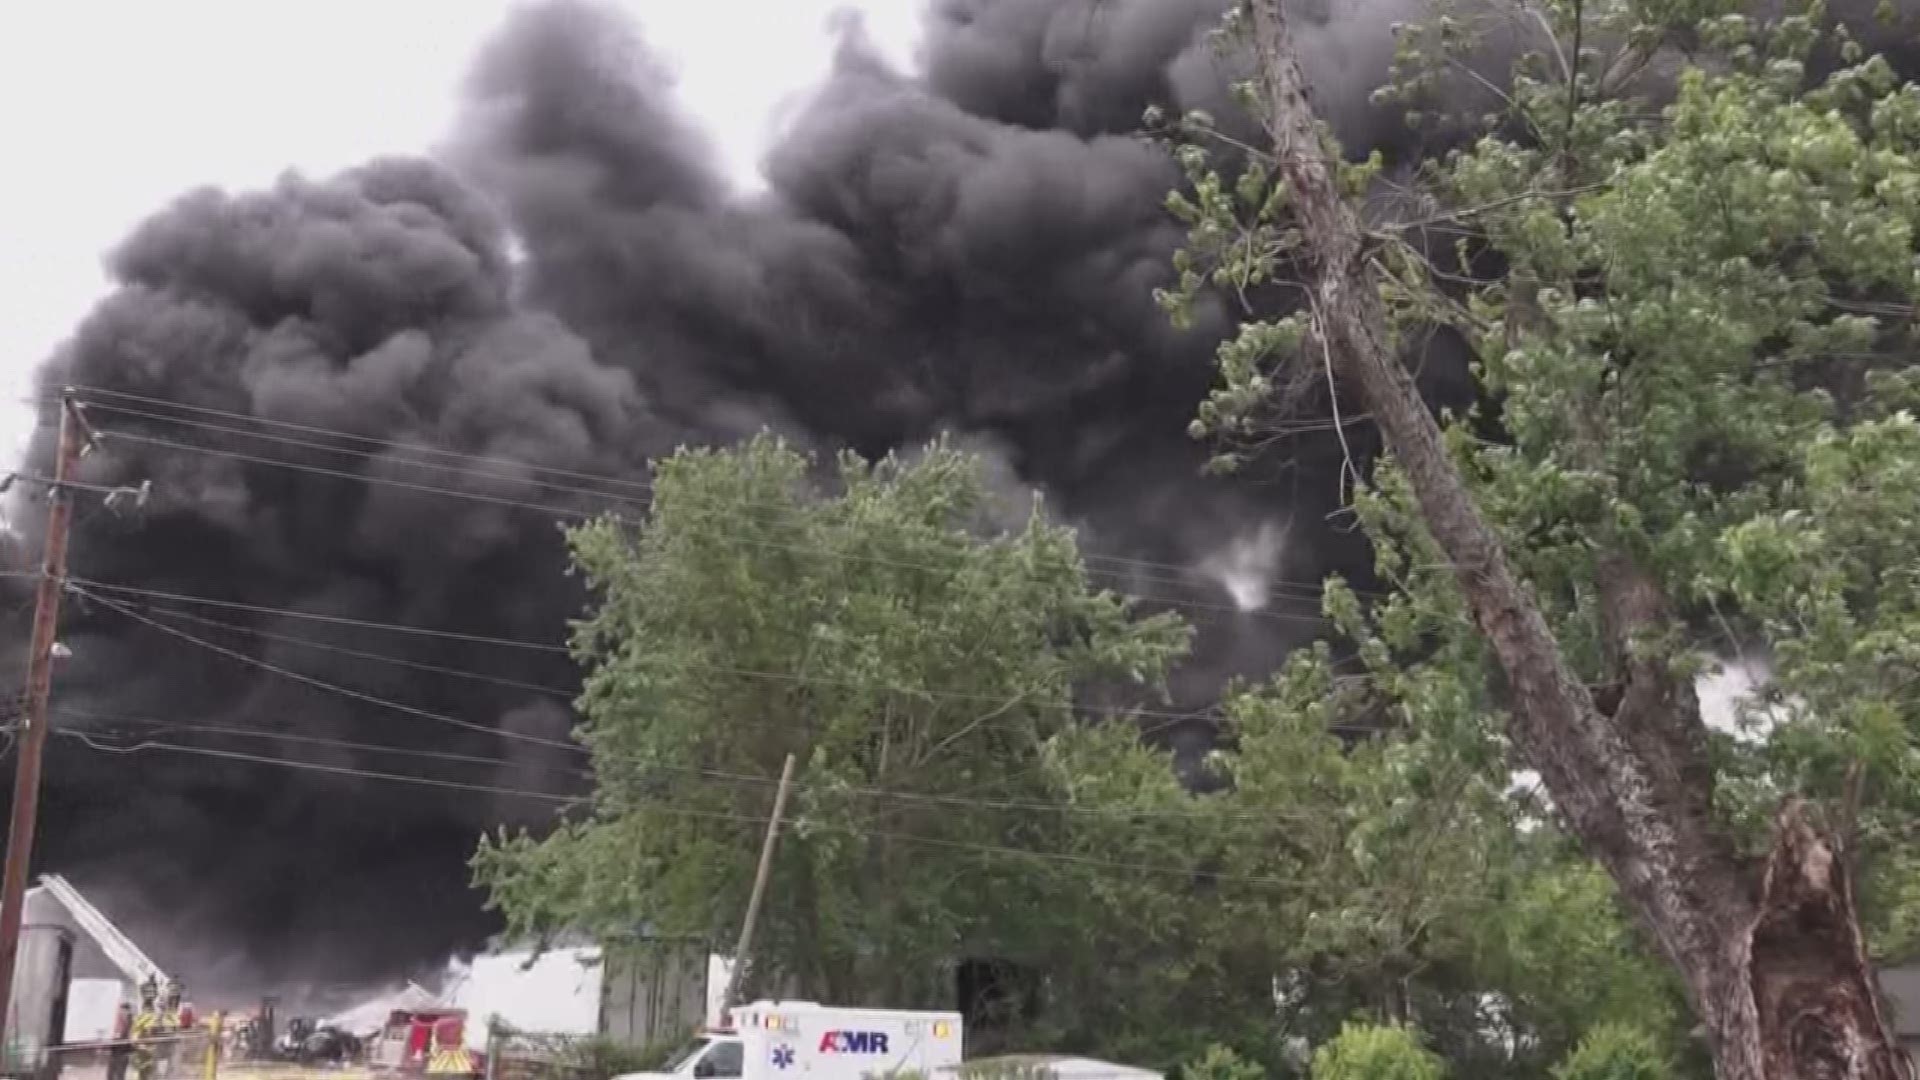 Huge piles of paper, cardboard and plastic were burning and sending a huge plume of black smoke into the air. Many people were concerned that toxic chemicals could be released into the air.